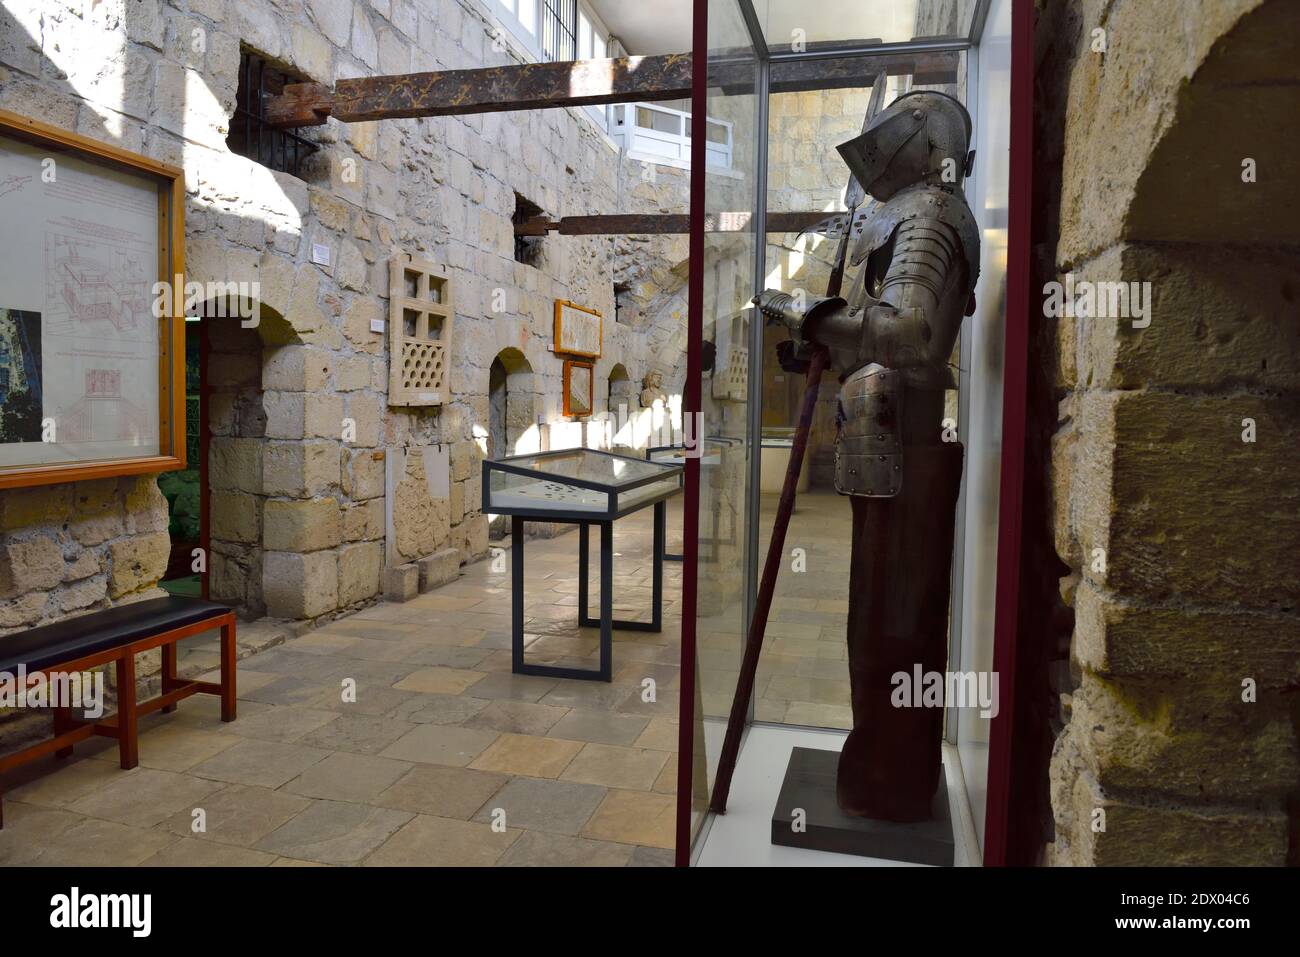 Interior Limassol Castle, built around 1590, prison cells used till 1950, now a museum, Cyprus Stock Photo